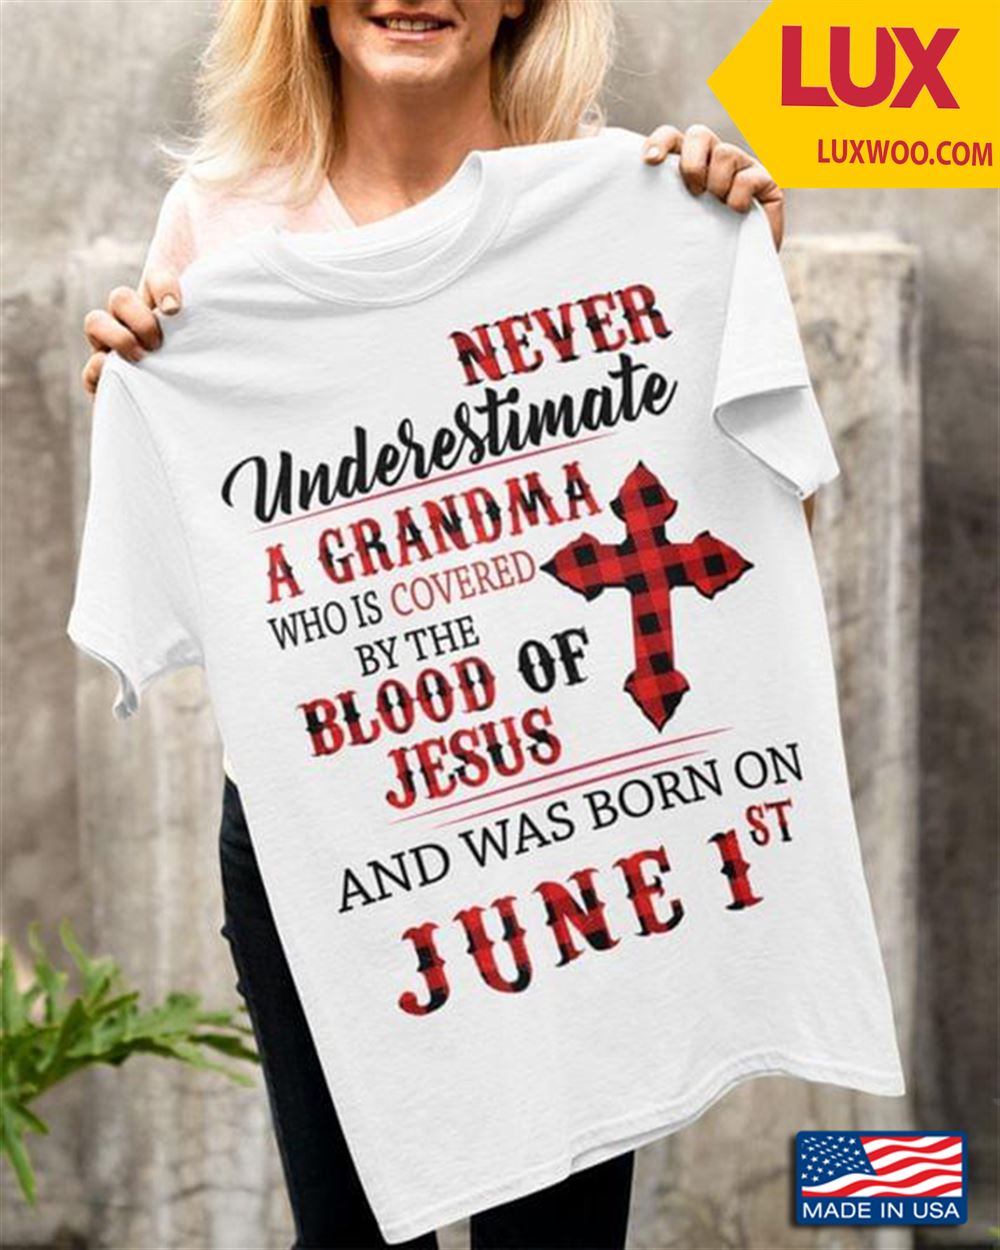 Never Underestimate A Grandma Who Is Covered By The Blood Of Jesus And Was Born On June 1st Shirt Size Up To 5xl